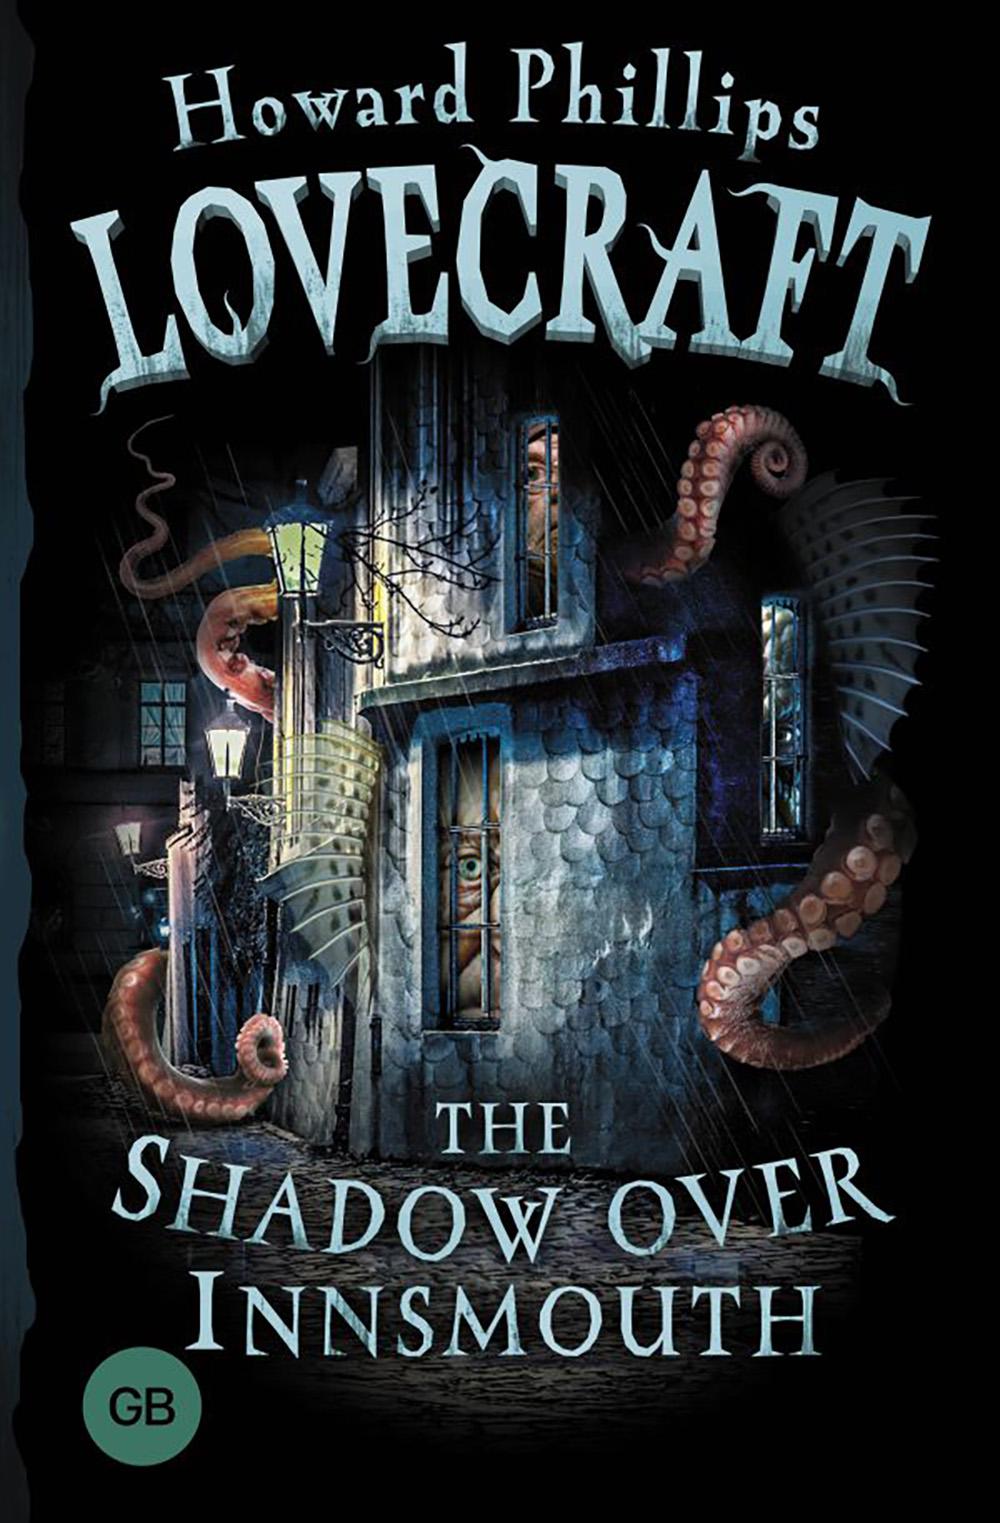 The Shadow over Innsmouth (/)